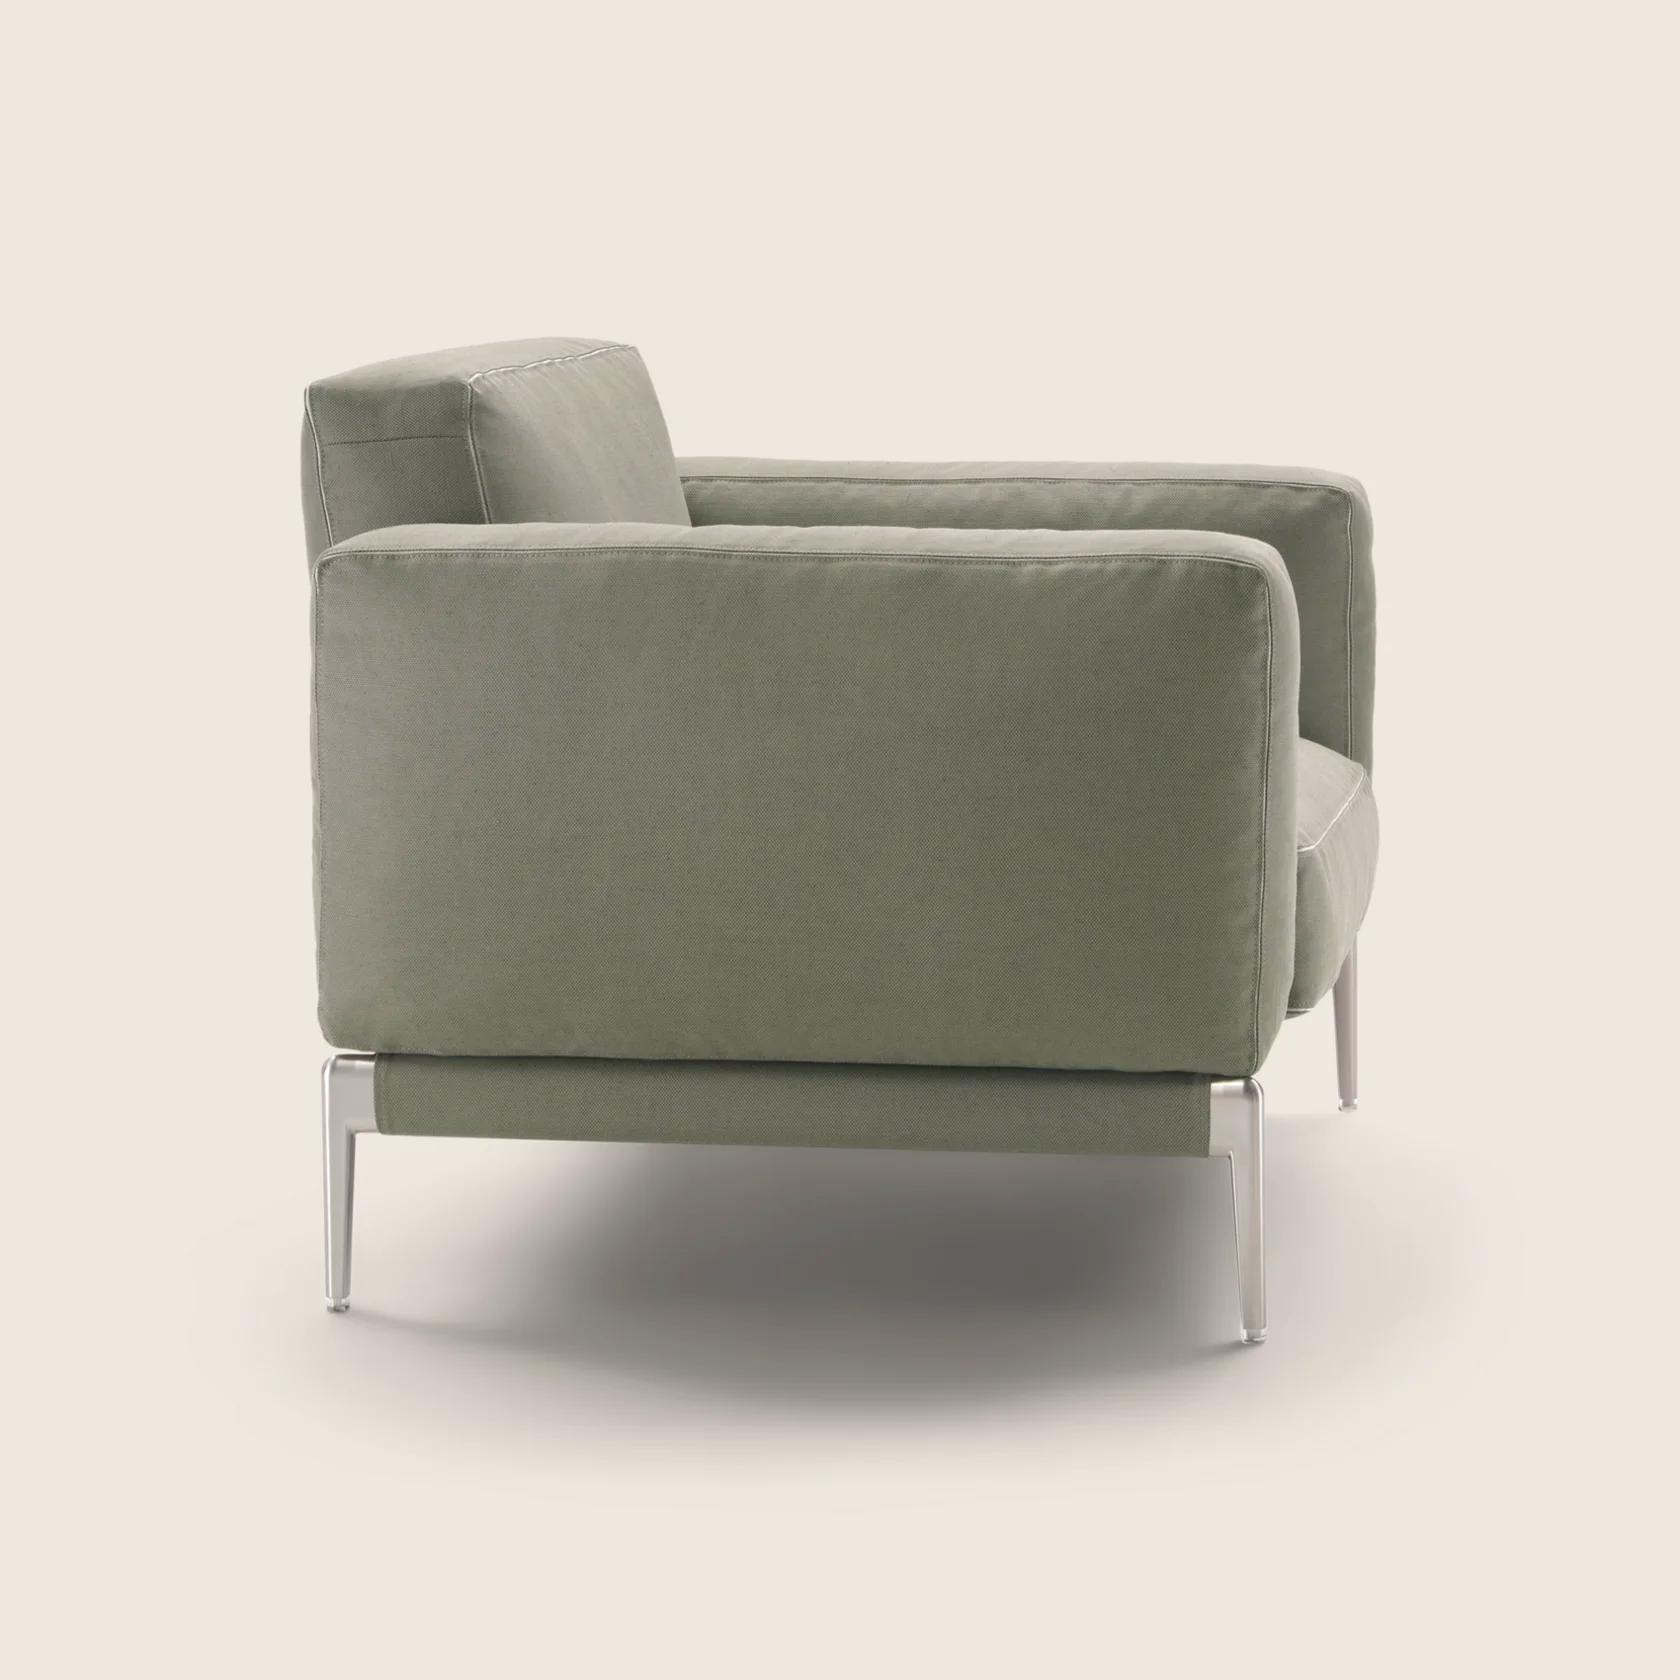 0264F1_ROMEO COMPACT_ARMCHAIR_02.png